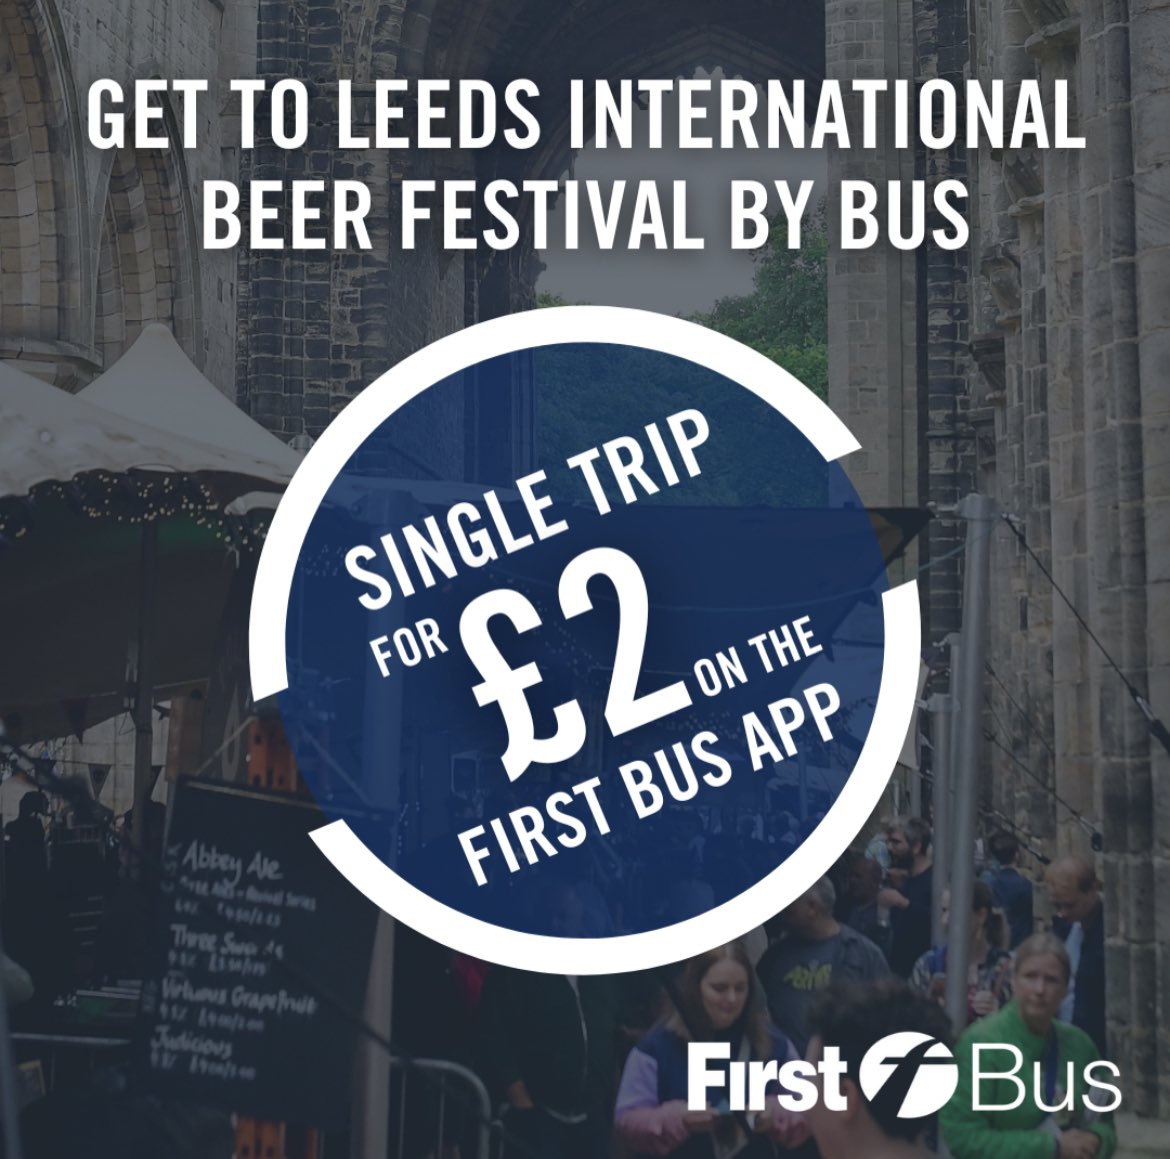 Hop on services 33, 34, 50 or 50A from Leeds city centre and grab a pint at Leeds International Beer Festival whilst listening to live bands. Download the First Bus App to plan your journey and buy your £2 Single ticket to Kirkstall Abbey 👉 iosfirstbusapp.onelink.me/ECIb/085zcreq 🚍📲